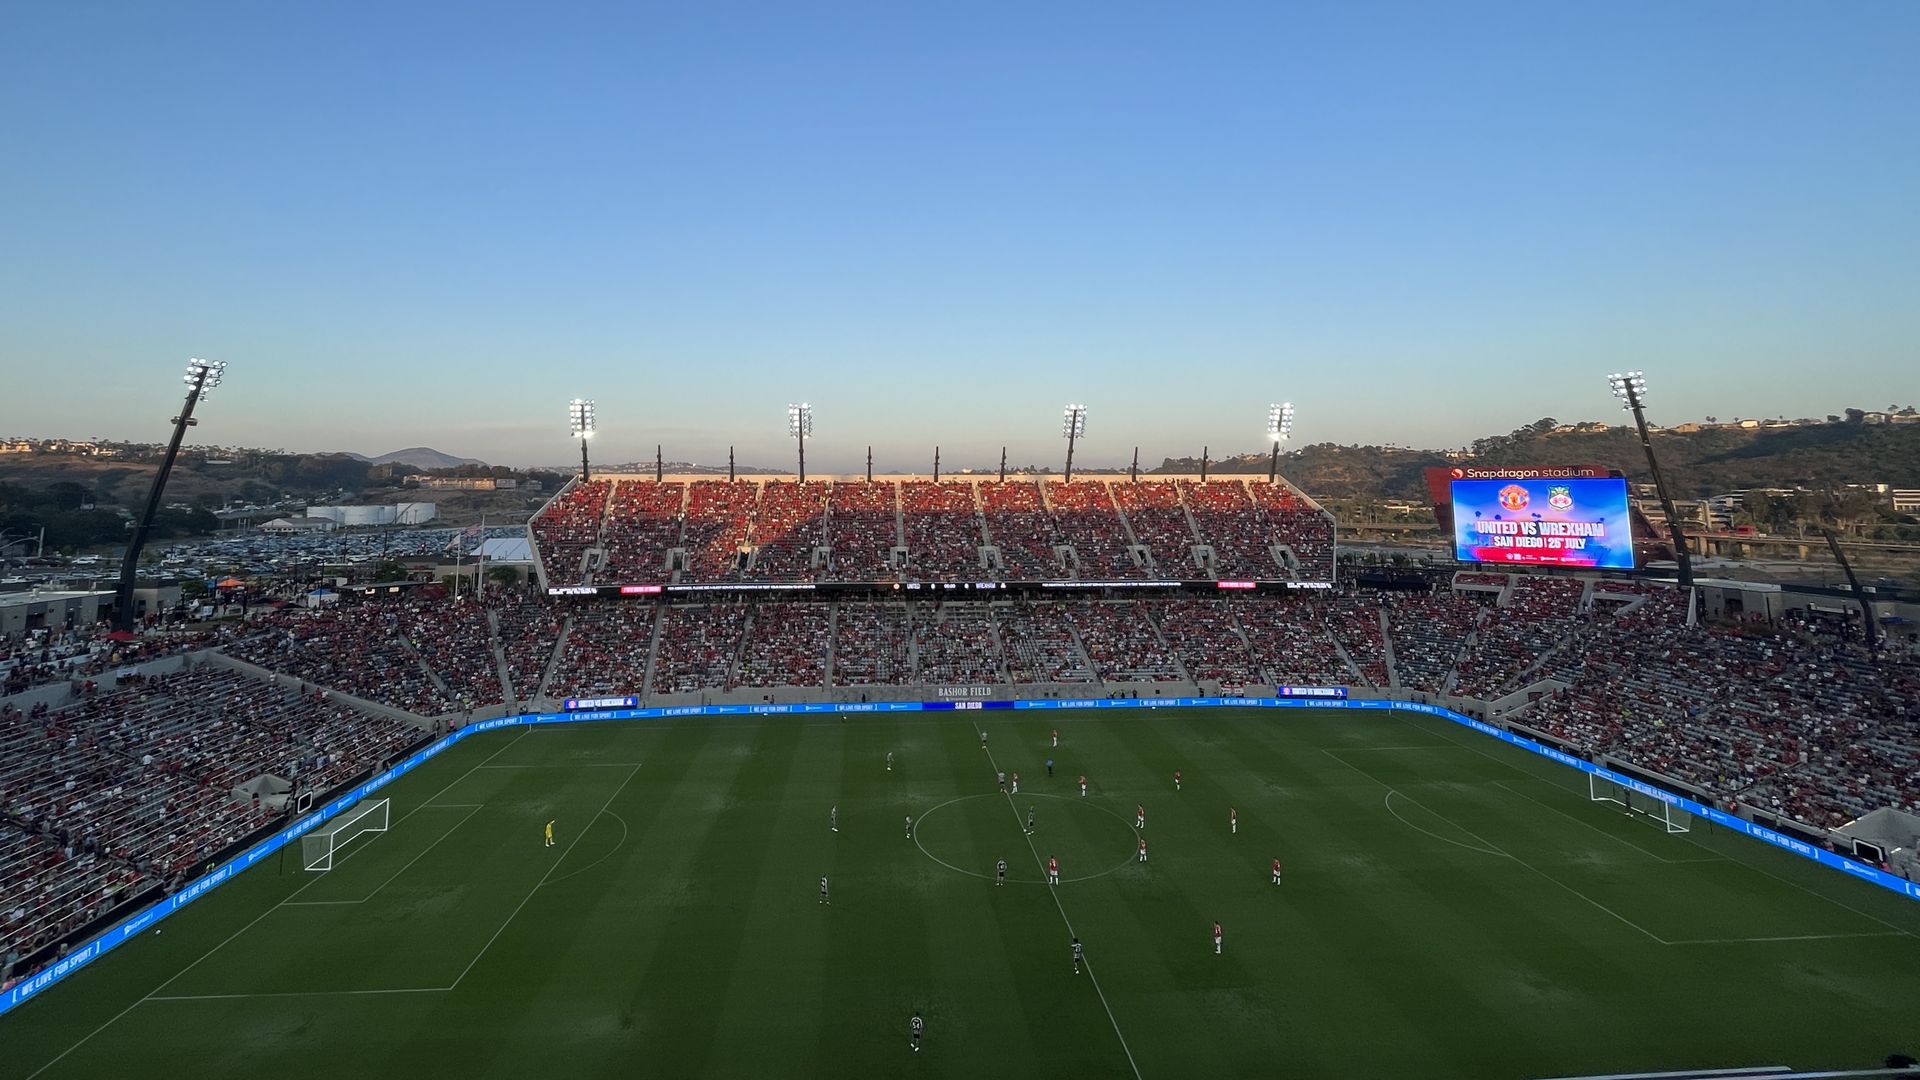 Professional soccer players line up in starting positions on a field at a stadium filled with fans at dusk.